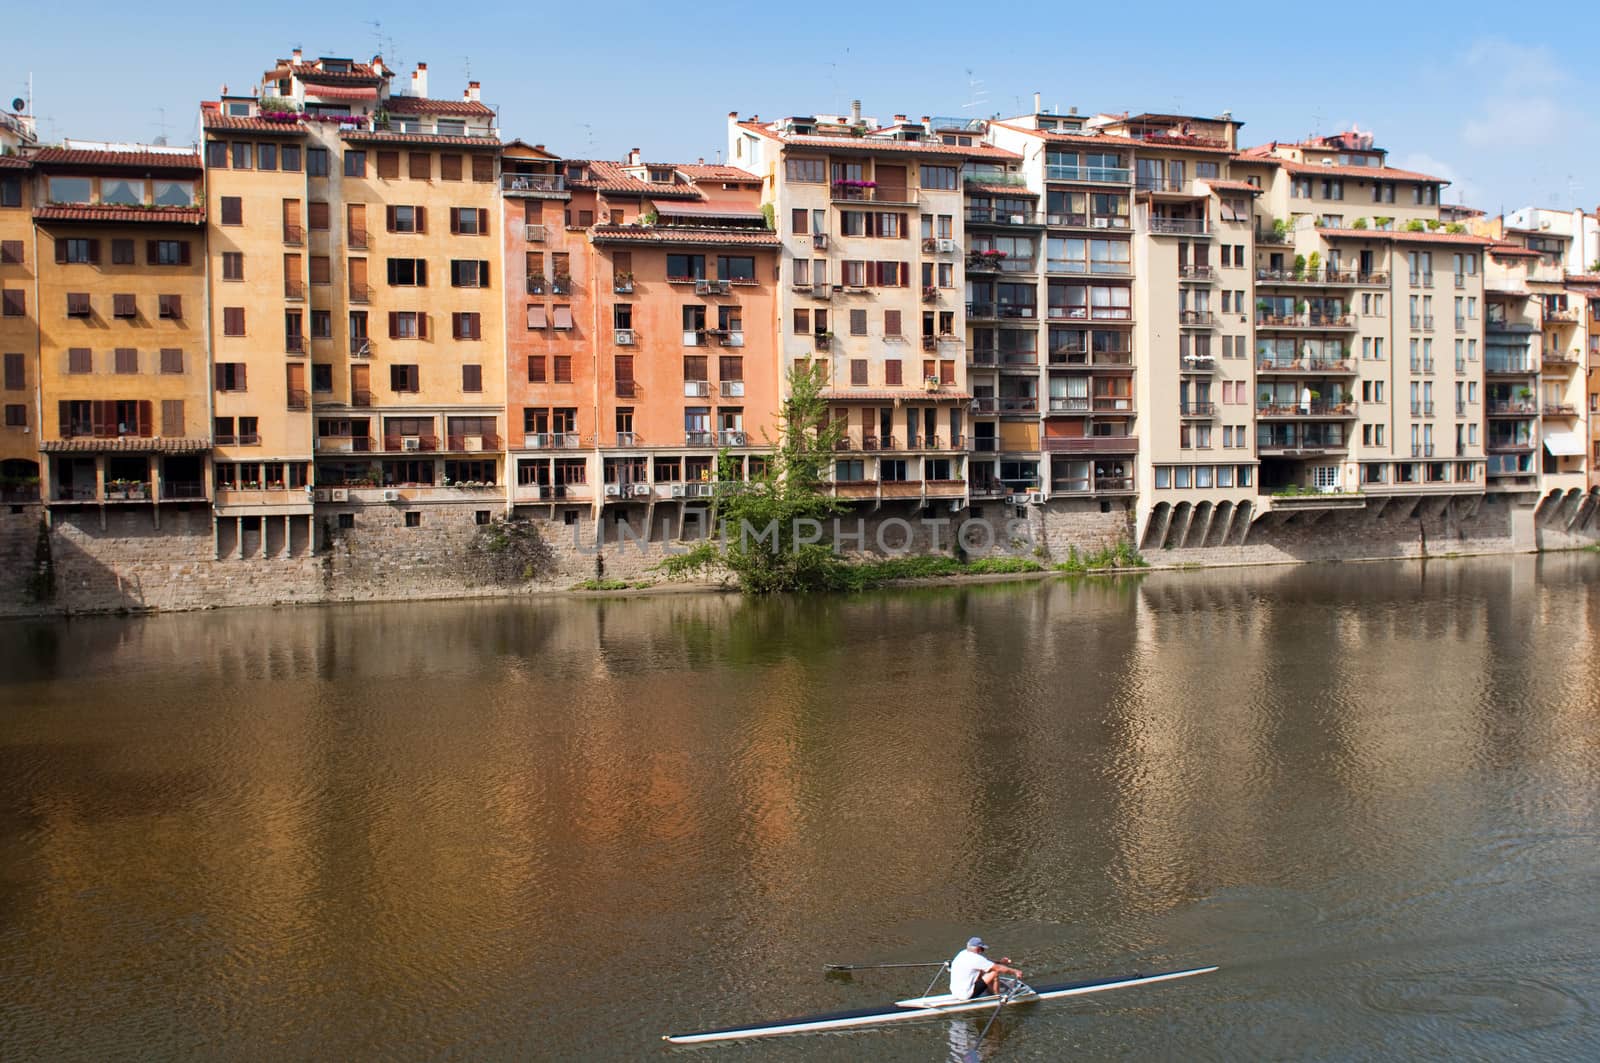 Bank of river Arno in Florence, Tuscany, Italy.